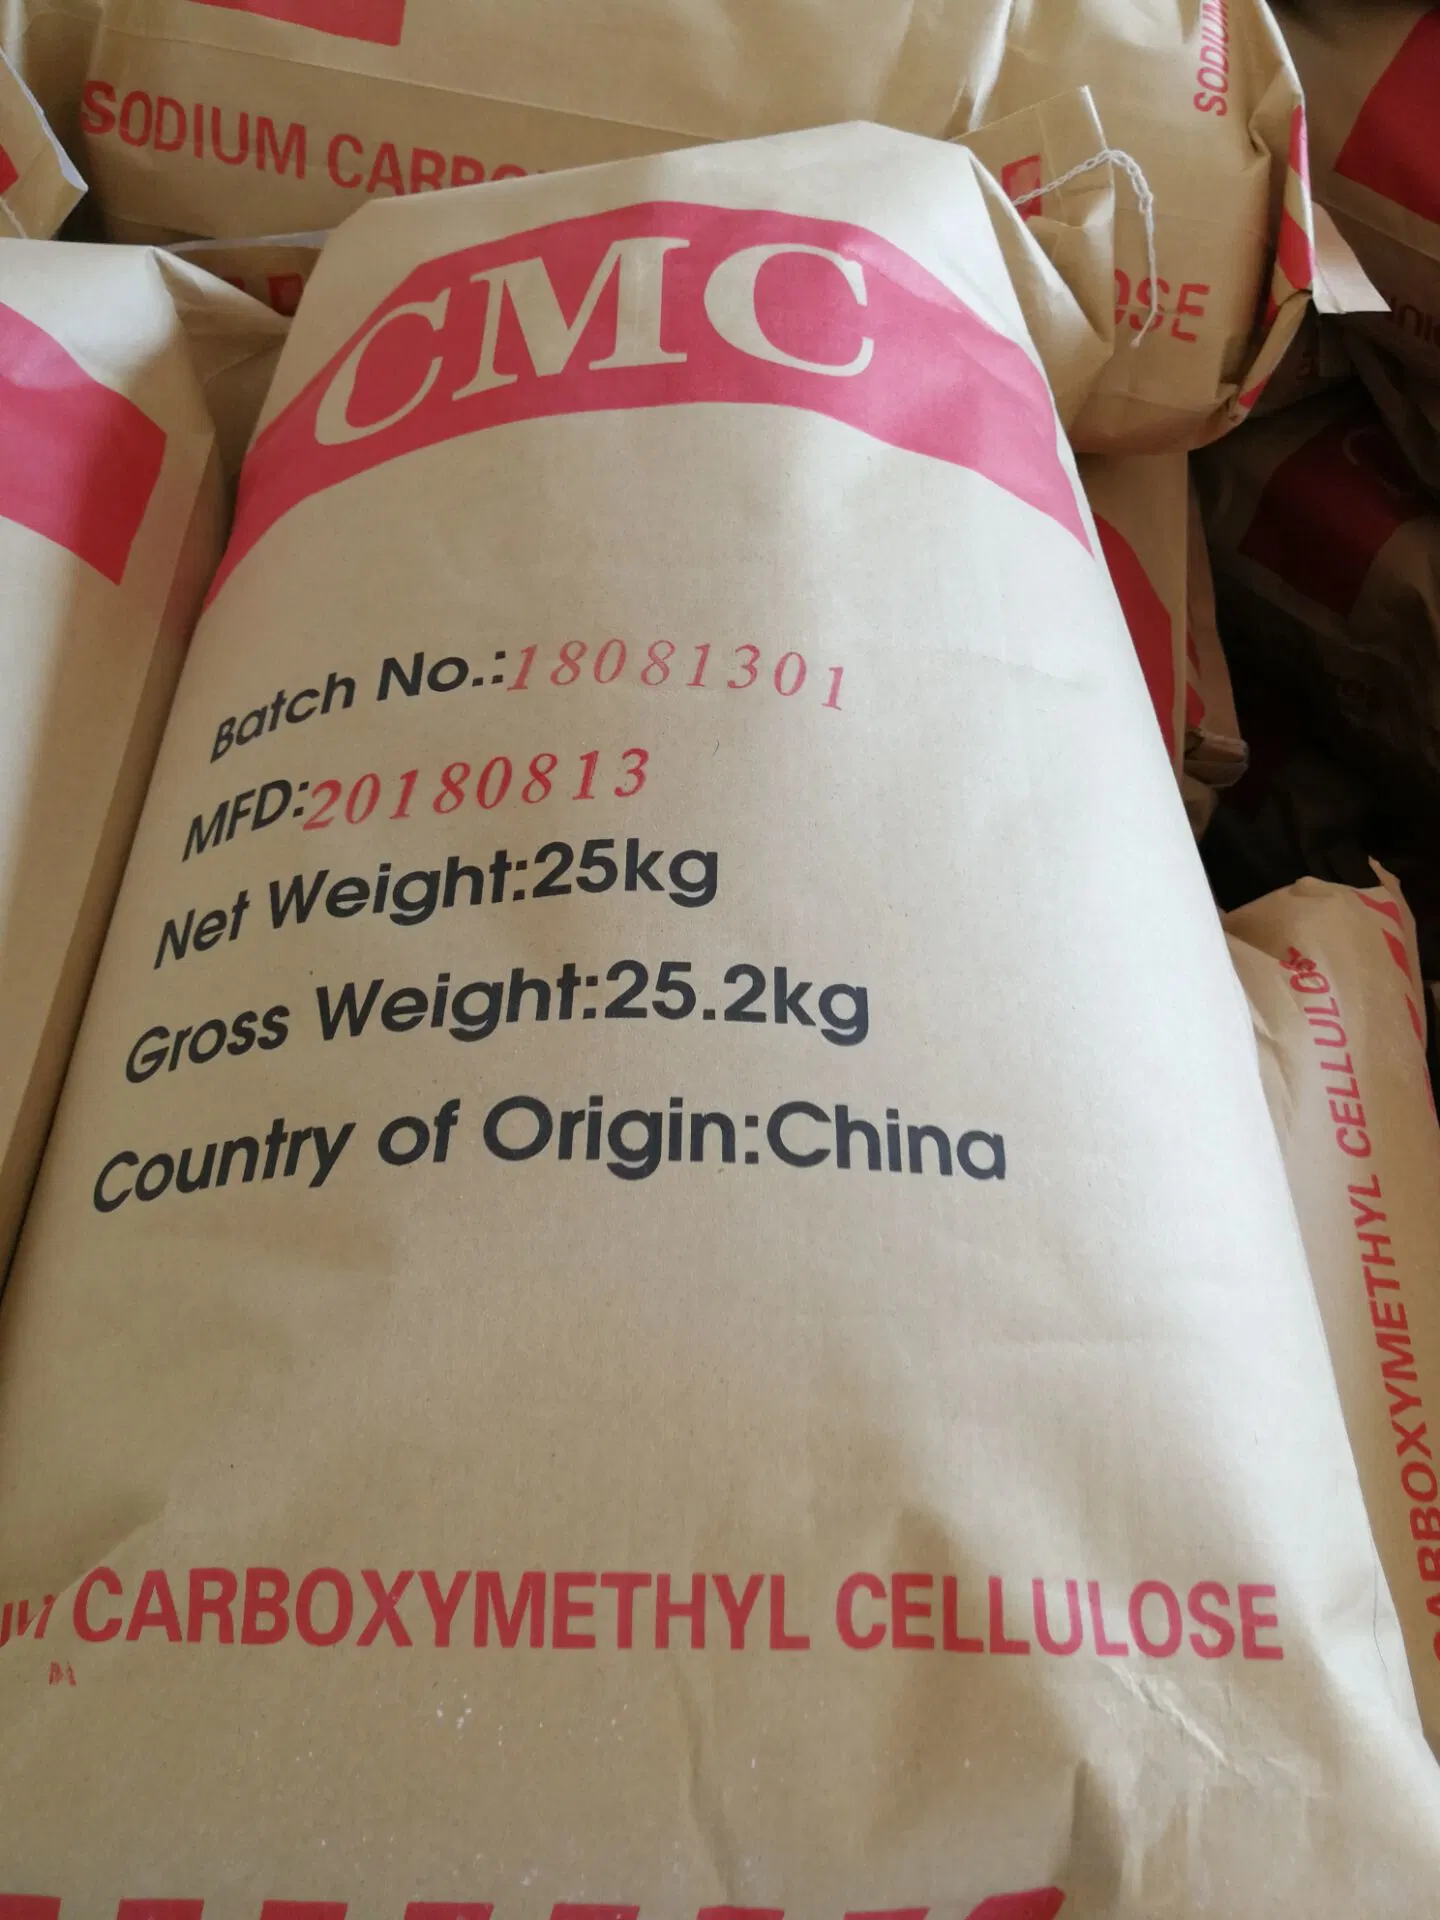 Food Ingredient Sodium Carboxymethylcellulose (CMC) as Thickener